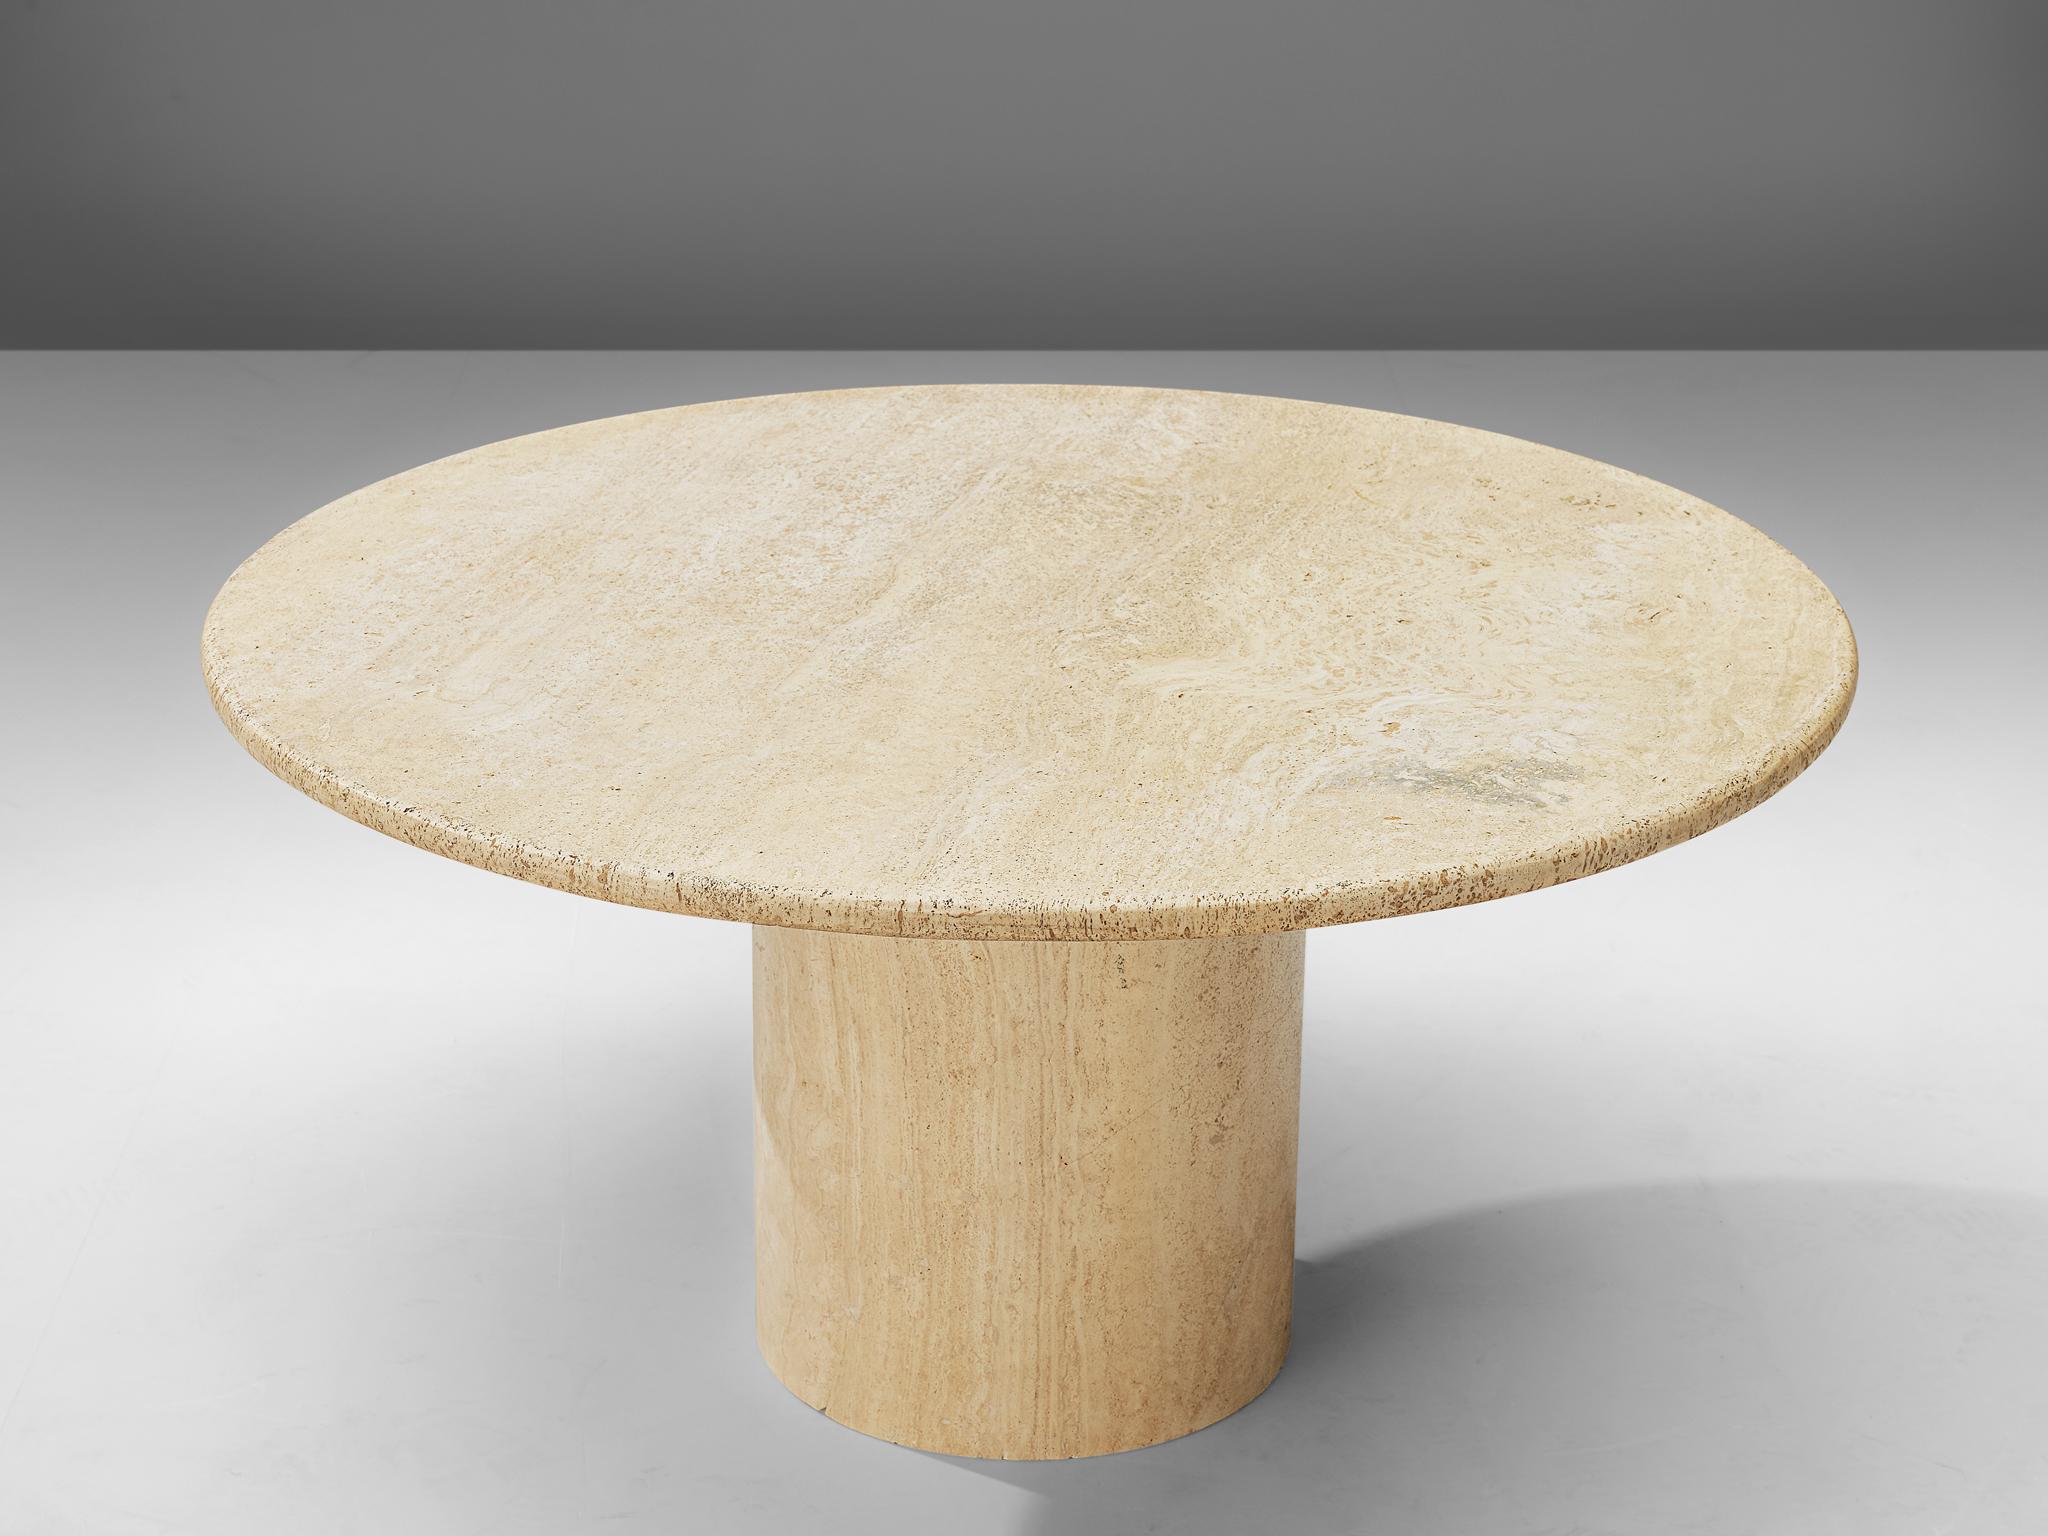 Cocktail table, travertine, Italy, 1970s.

This strong coffee table features a column foot and a thick circular tabletop. The aesthetics are archetypical for postmodern design, bearing references to architectural forms and without a clean